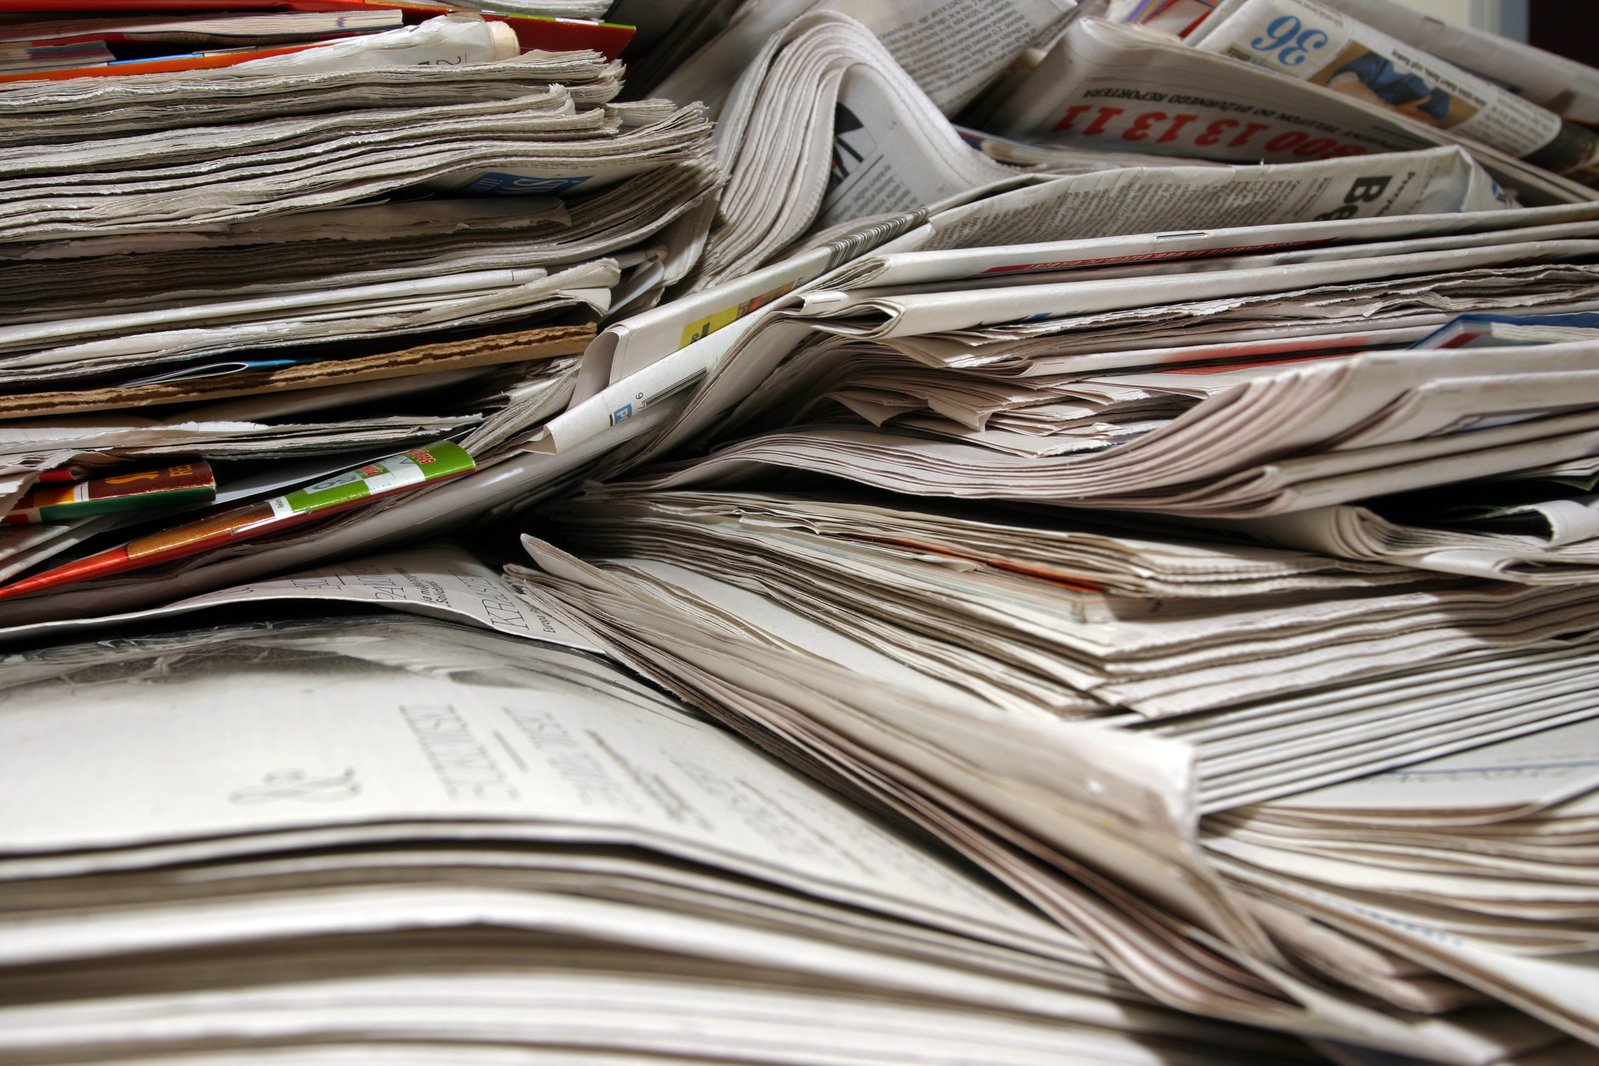 there is a large pile of newspapers that has been thrown